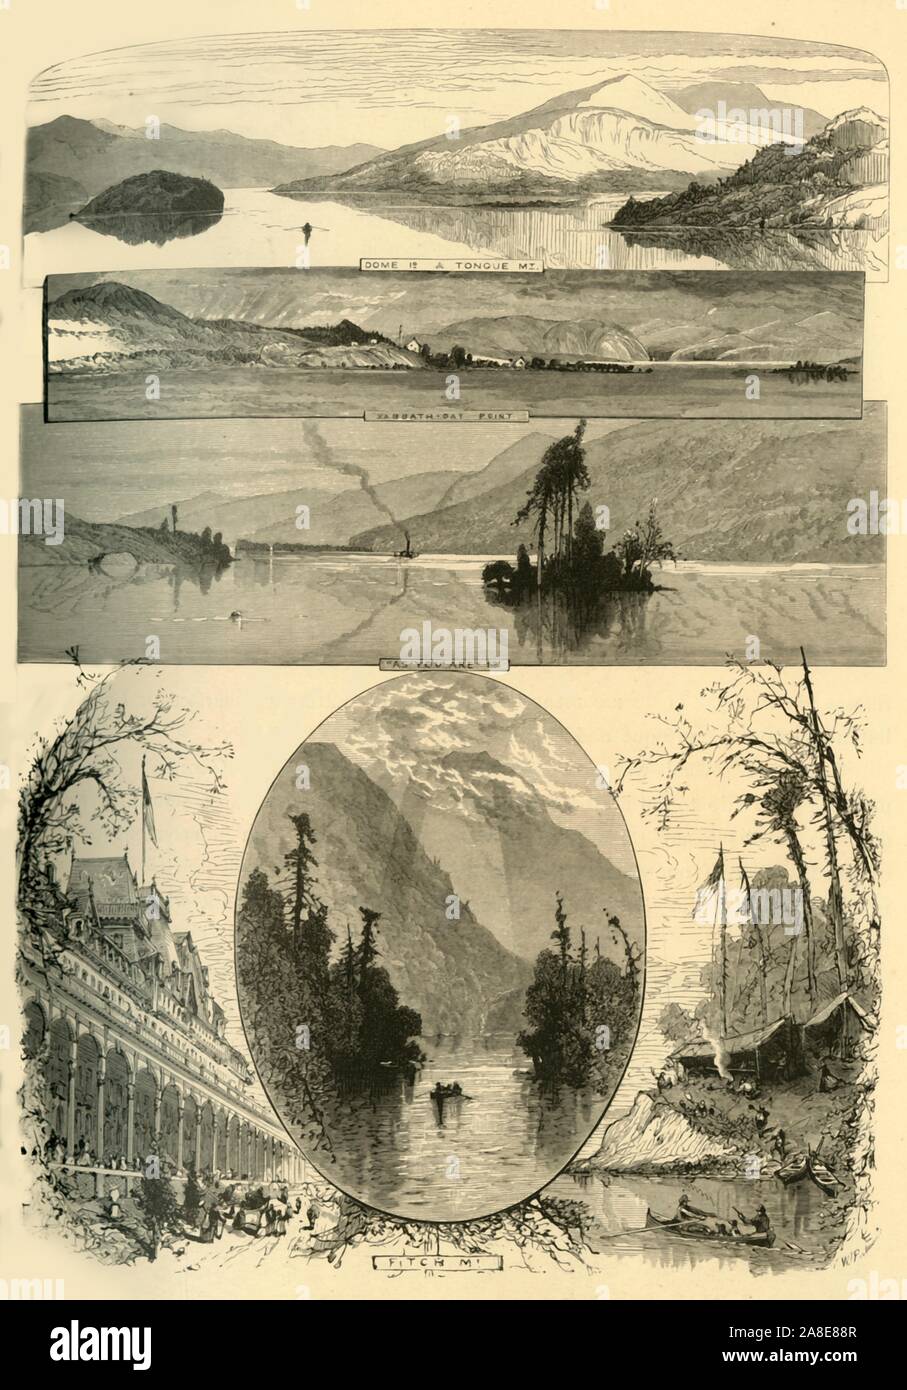 'Scenes on Lake George', 1874. 'Dome Island &amp; Tongue Mountain, Sabbath Day Point, &quot;As You Are&quot; Island, Fitch Mountain', New York State, USA. From &quot;Picturesque America; or, The Land We Live In, A Delineation by Pen and Pencil of the Mountains, Rivers, Lakes...with Illustrations on Steel and Wood by Eminent American Artists&quot; Vol. II, edited by William Cullen Bryant. [D. Appleton and Company, New York, 1874] Stock Photo